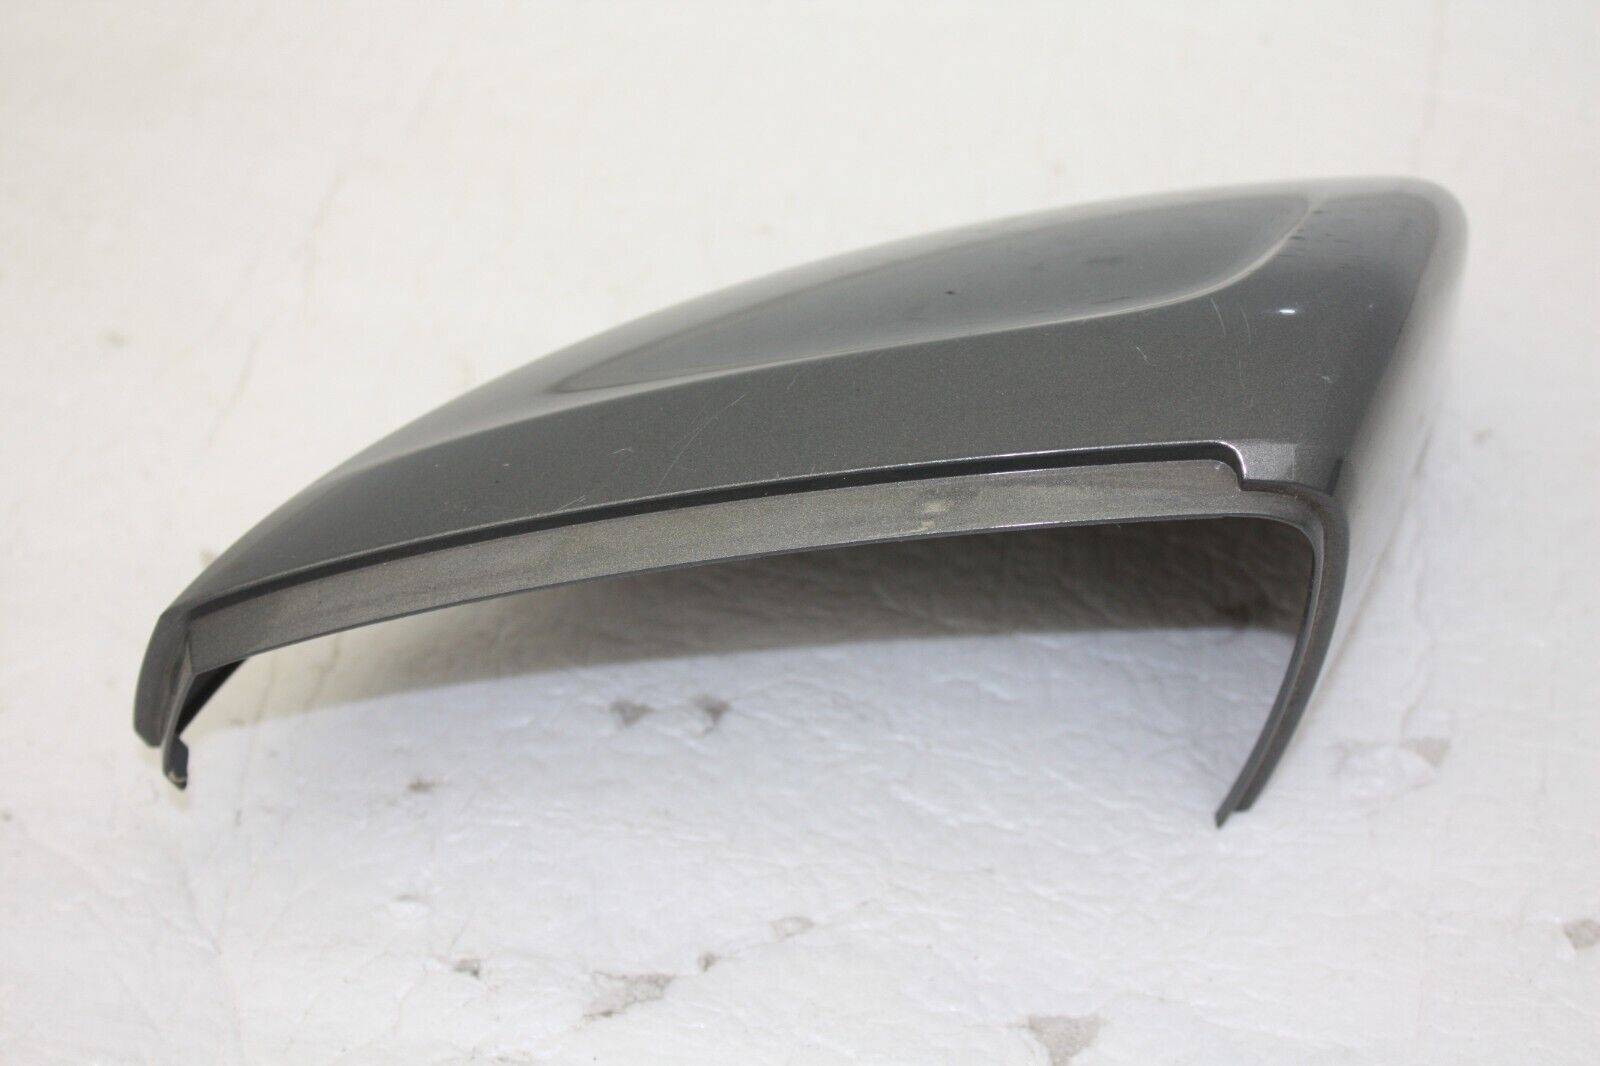 Audi-A1-VW-Polo-Left-Side-Mirror-Cover-2G0857537A-Genuine-176401790996-4